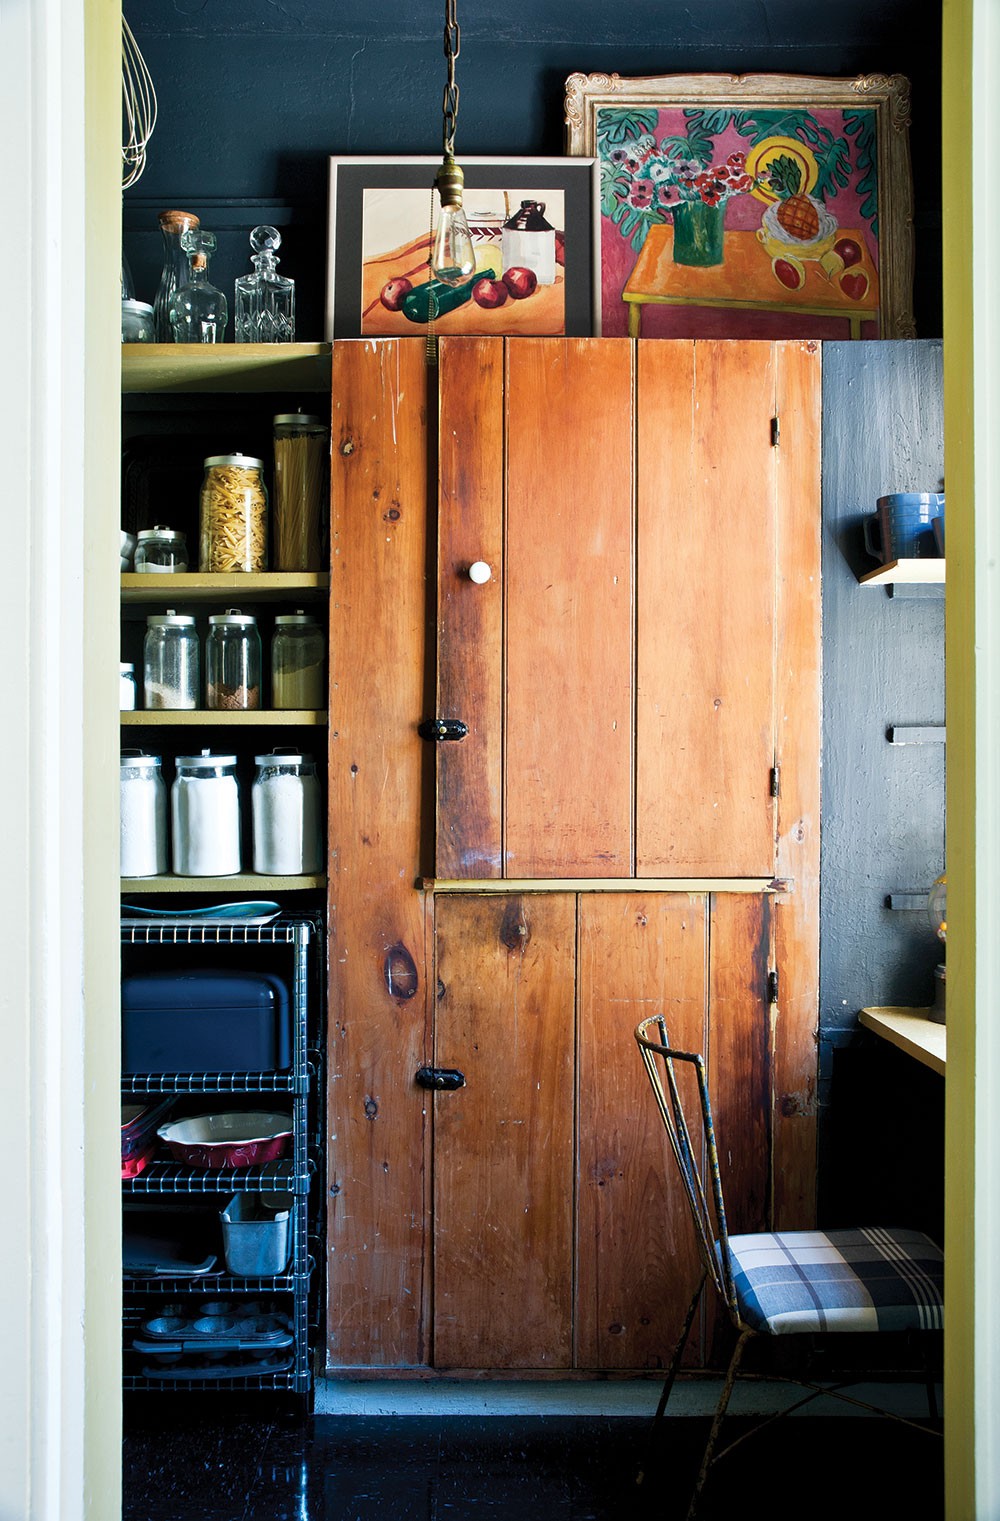 The brown wood cabinet in the pantry is original to this house. - DEBORAH DEGRAFFENREID